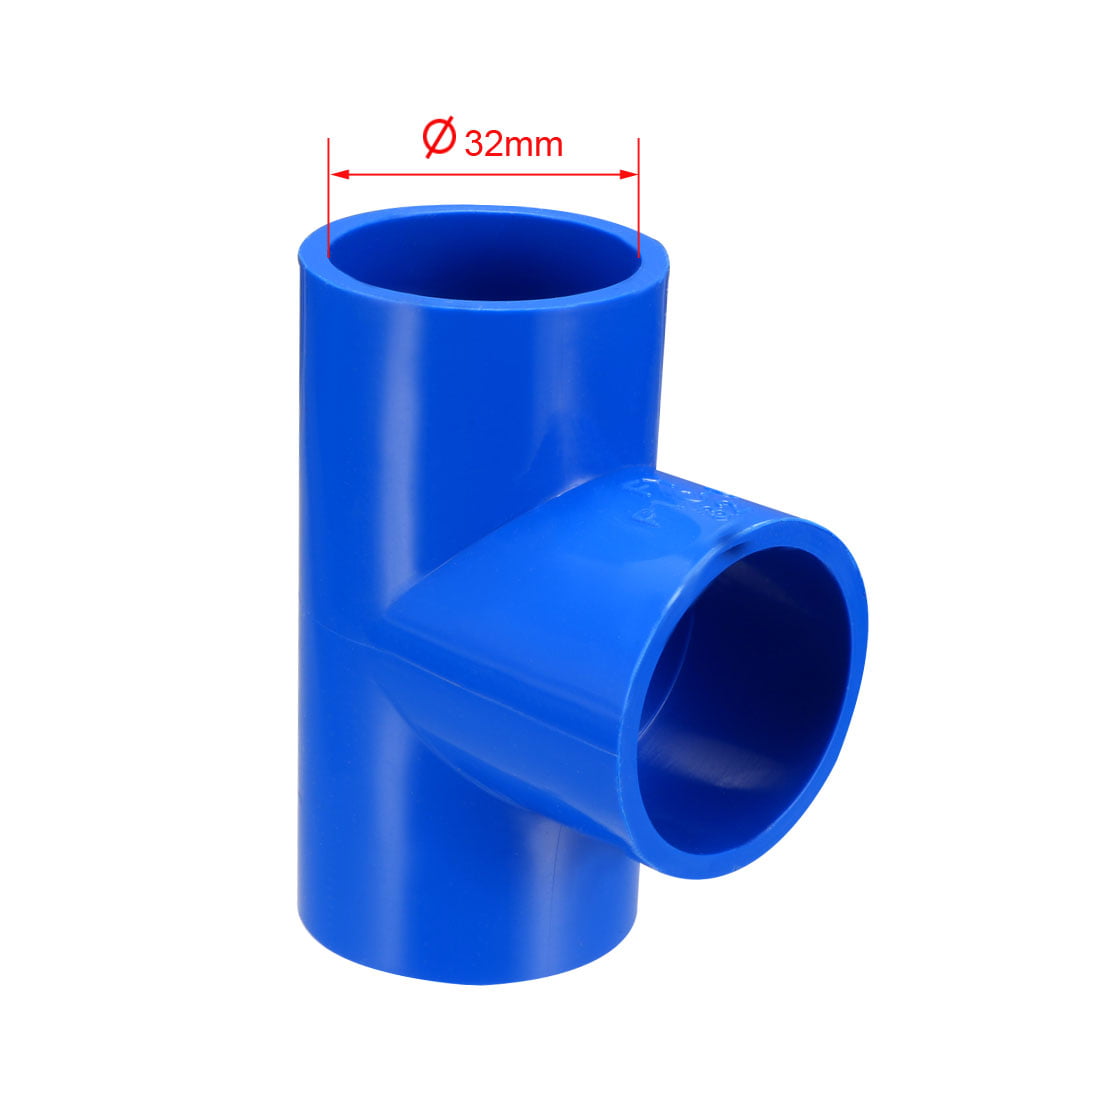 32mm Slip Tee PVC Pipe Fitting  T-Shaped Coupling Connector